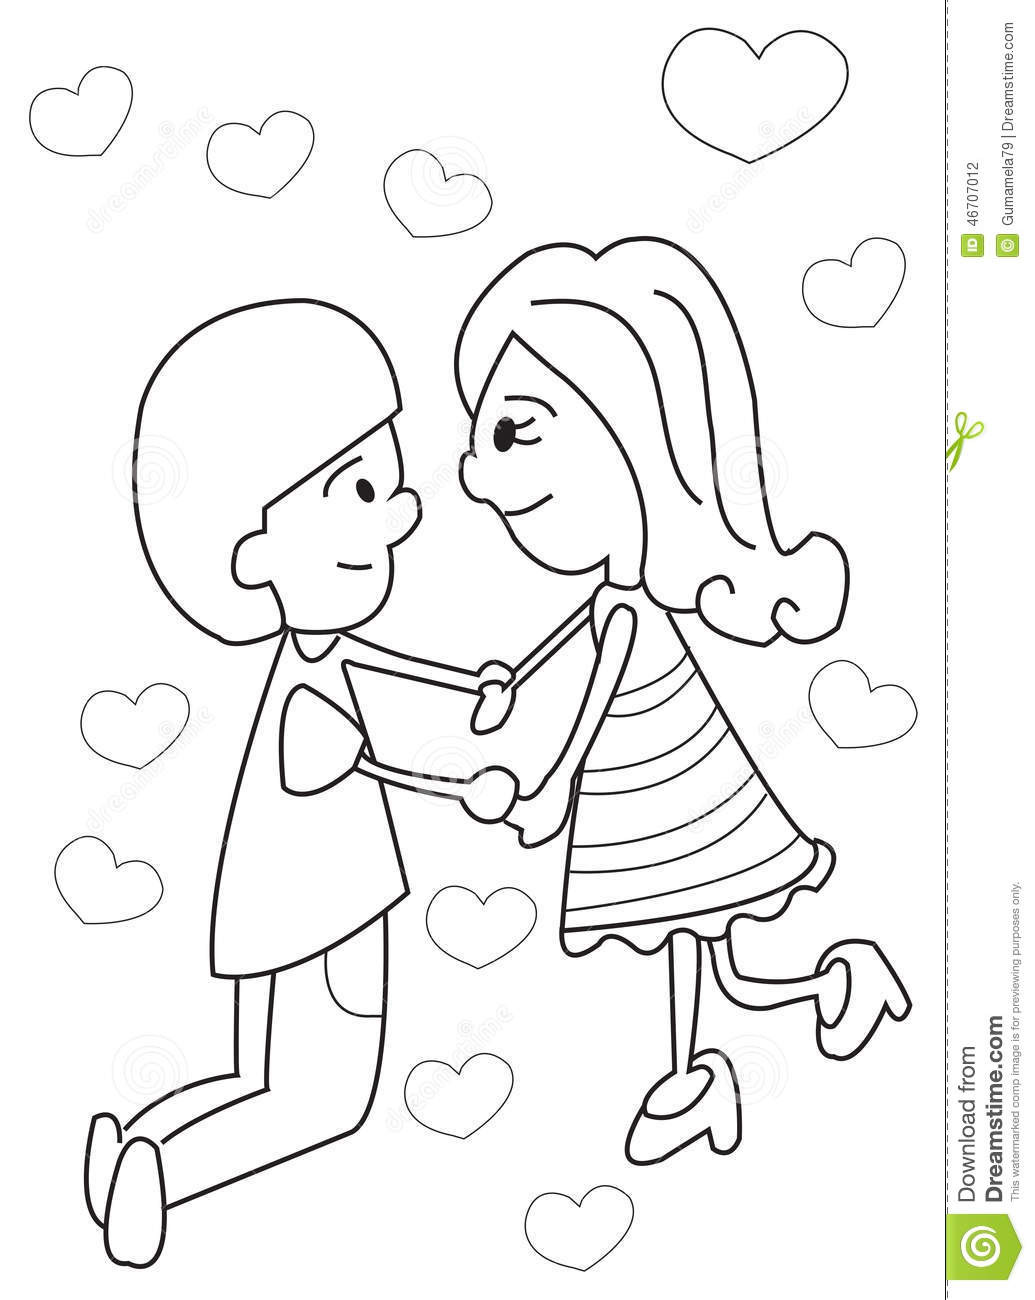 What Boys Love Coloring Sheets
 Hand Drawn Coloring Page A Boy And Girl Holding Hands